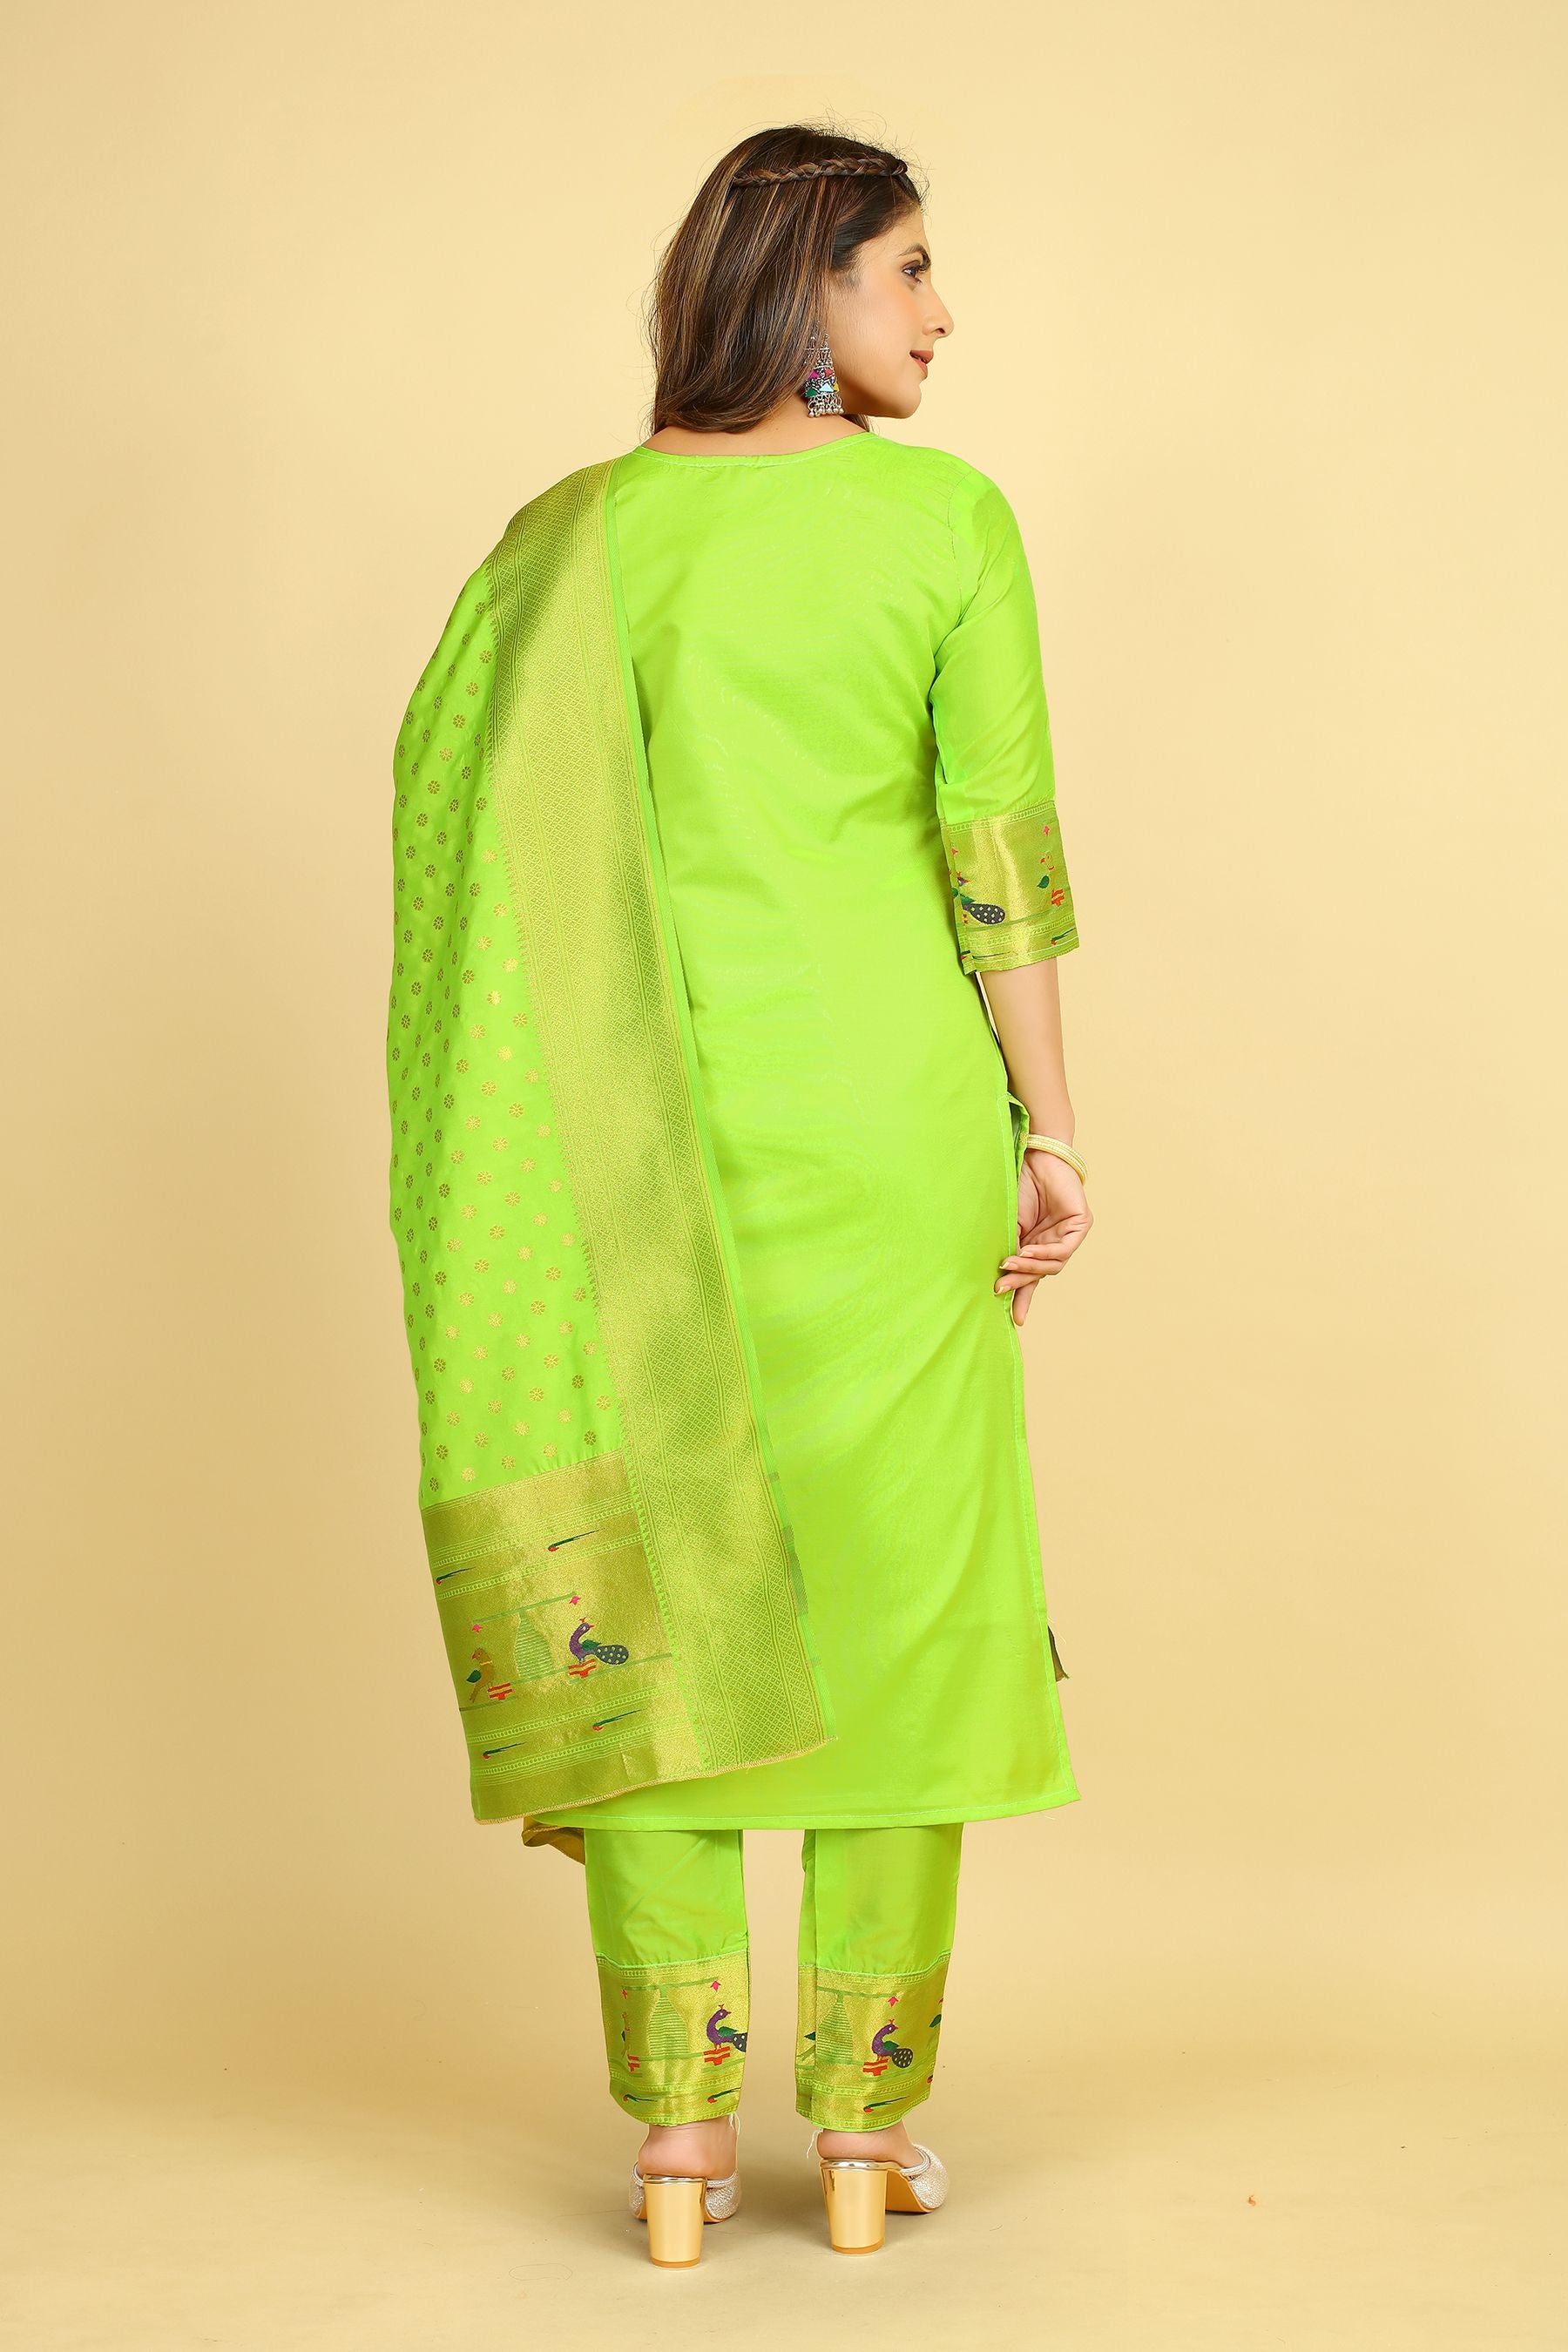 Lemon Green Color latest indian suits fashion in zari weaving work suits in Paithani Style